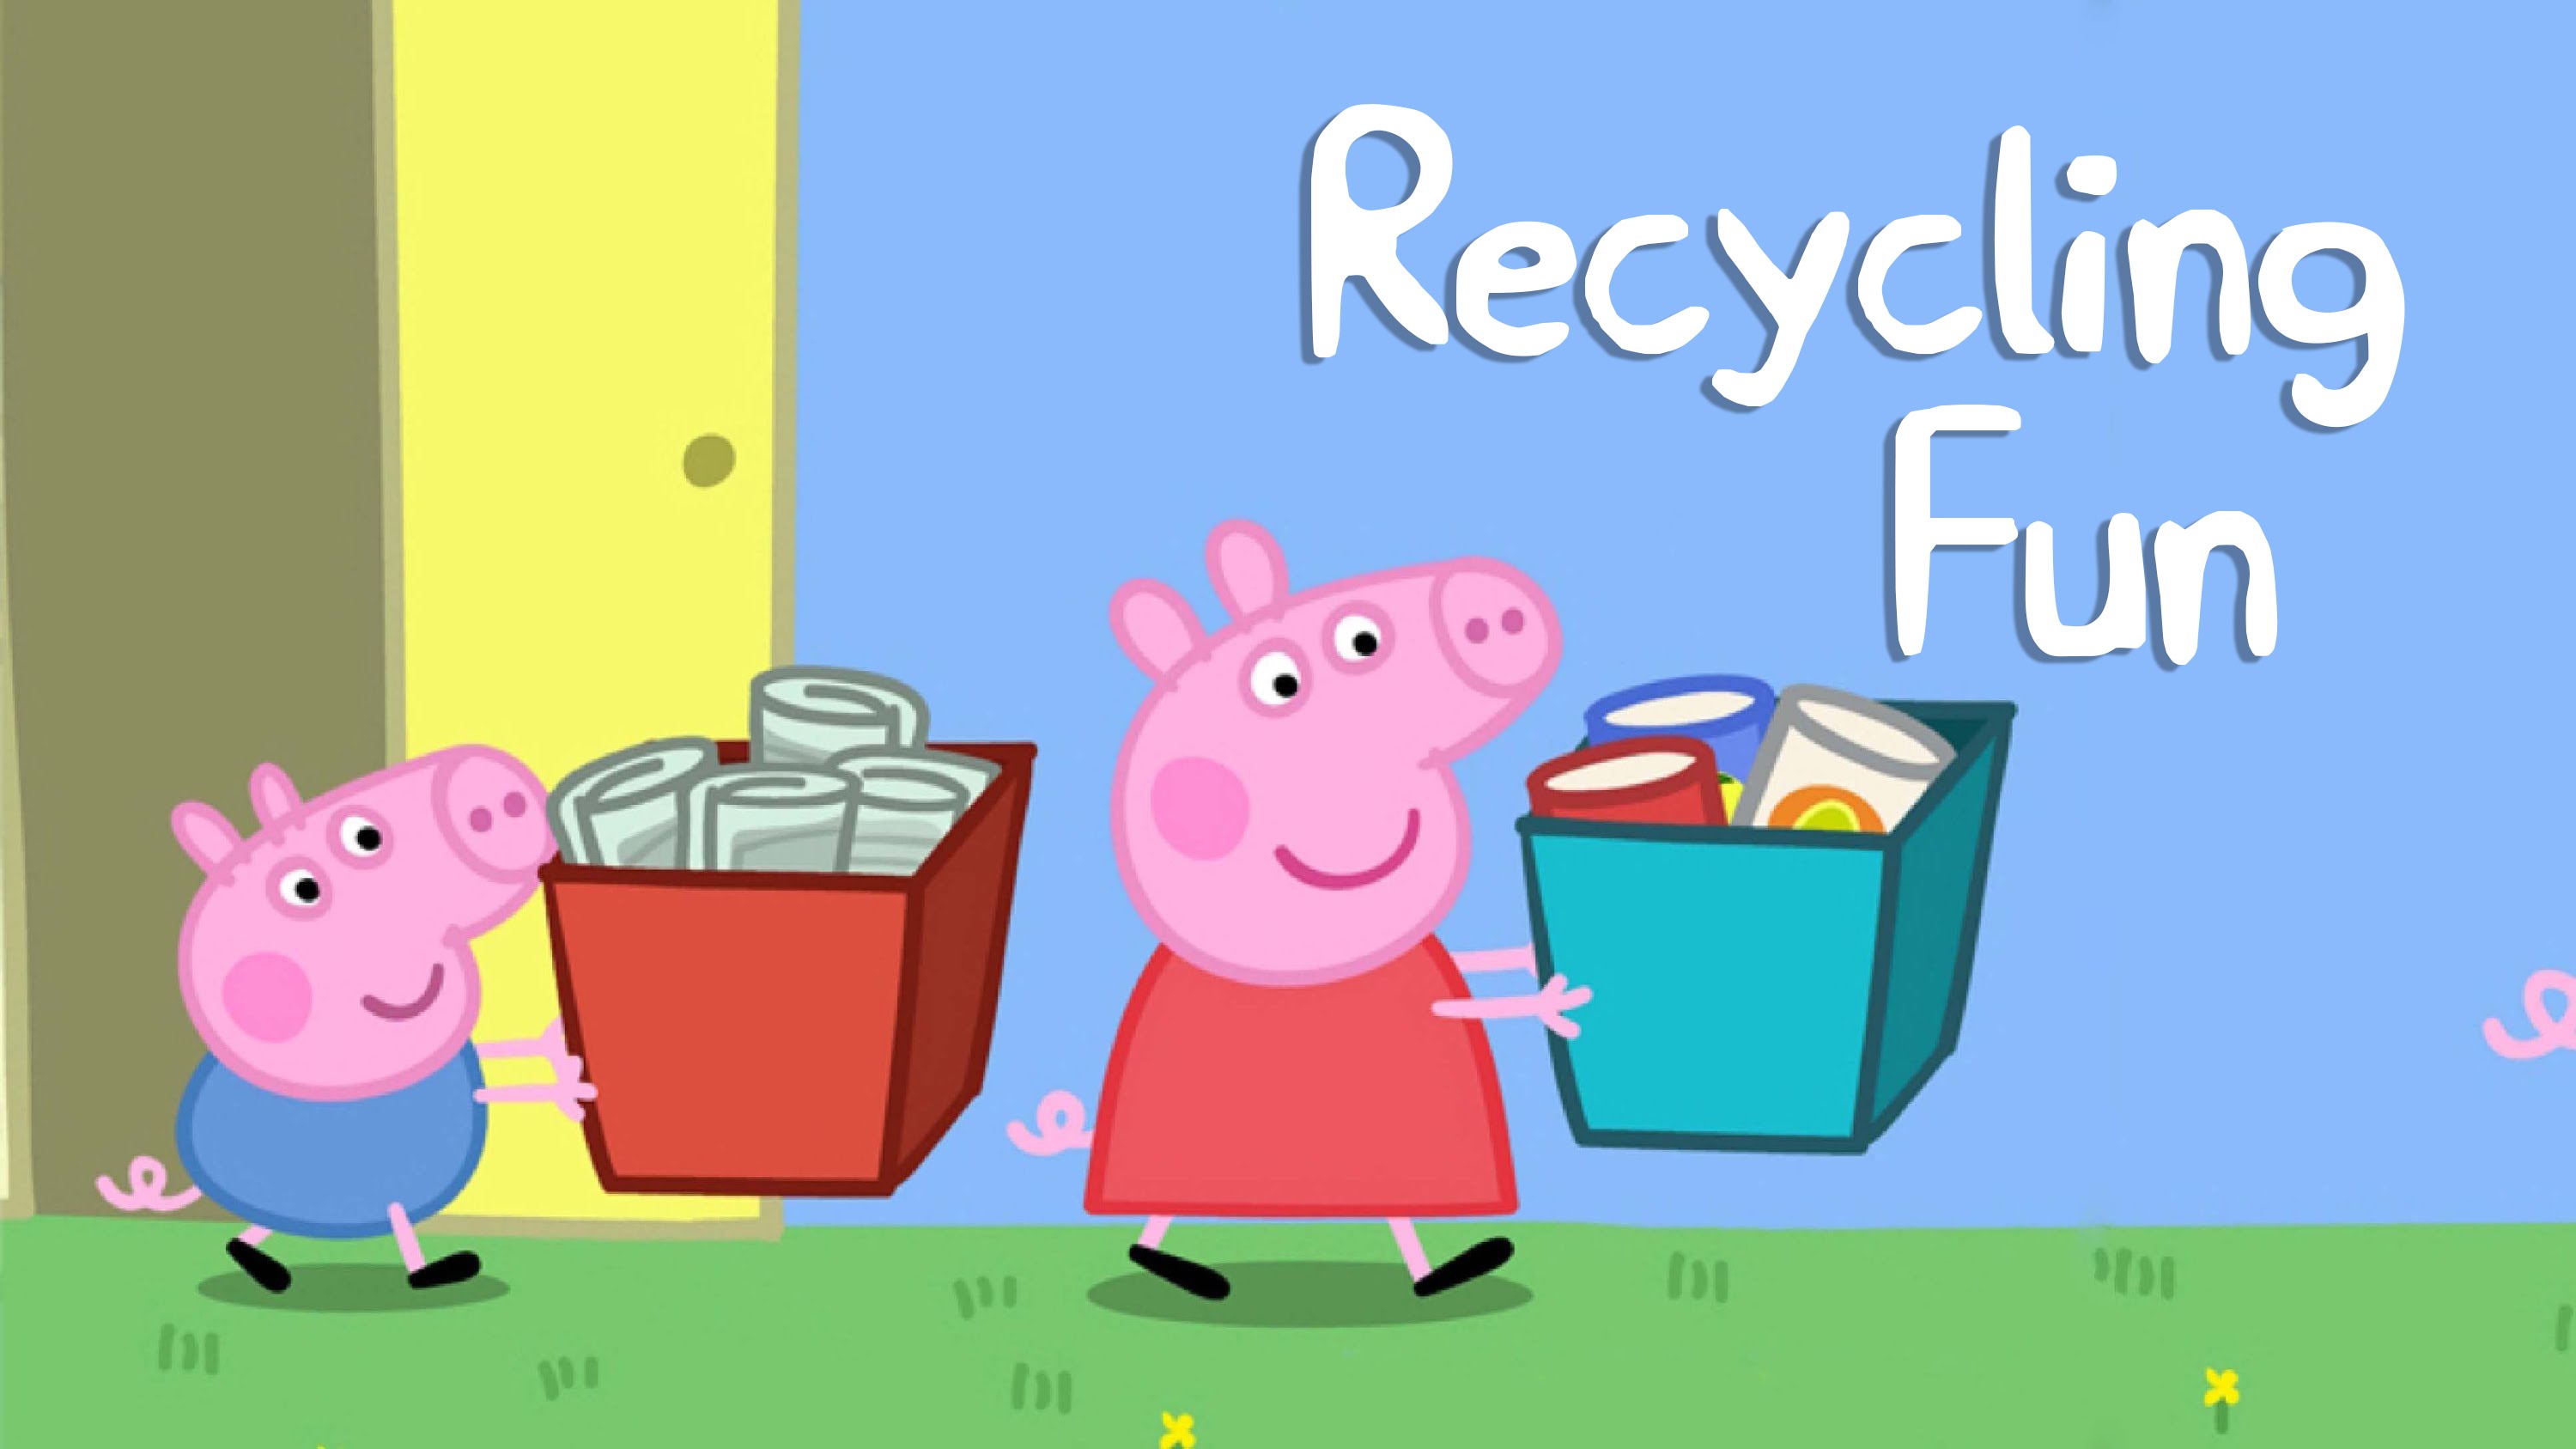 You are reading: My 10 Favorite Peppa Pig Episodes with Powerful Life Lessons That May Help You to Raise a Champion Kid